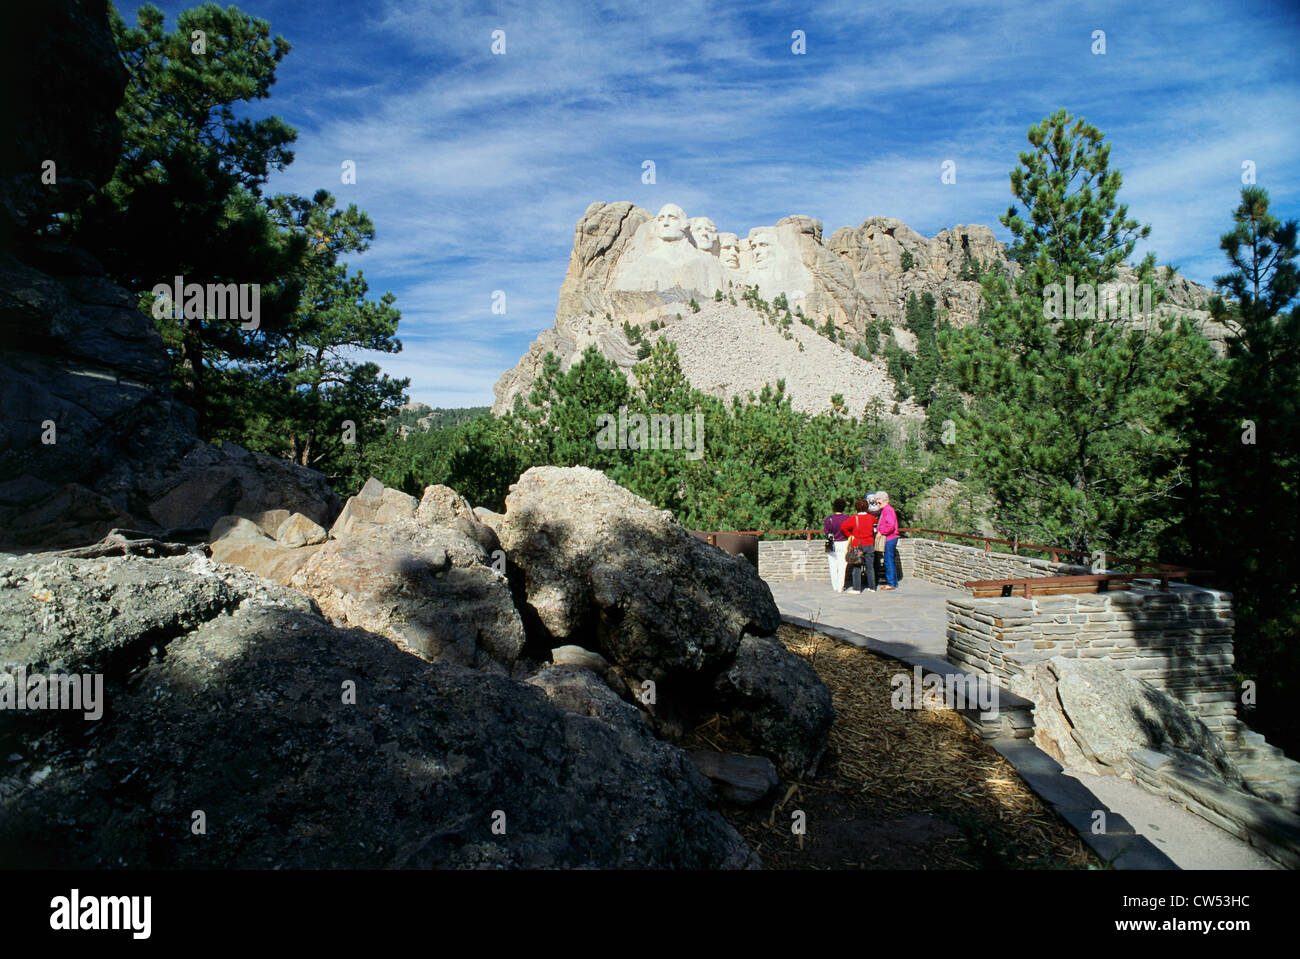 Tourists viewing a monument from an observation point, Mt Rushmore National Monument, South Dakota, USA Stock Photo